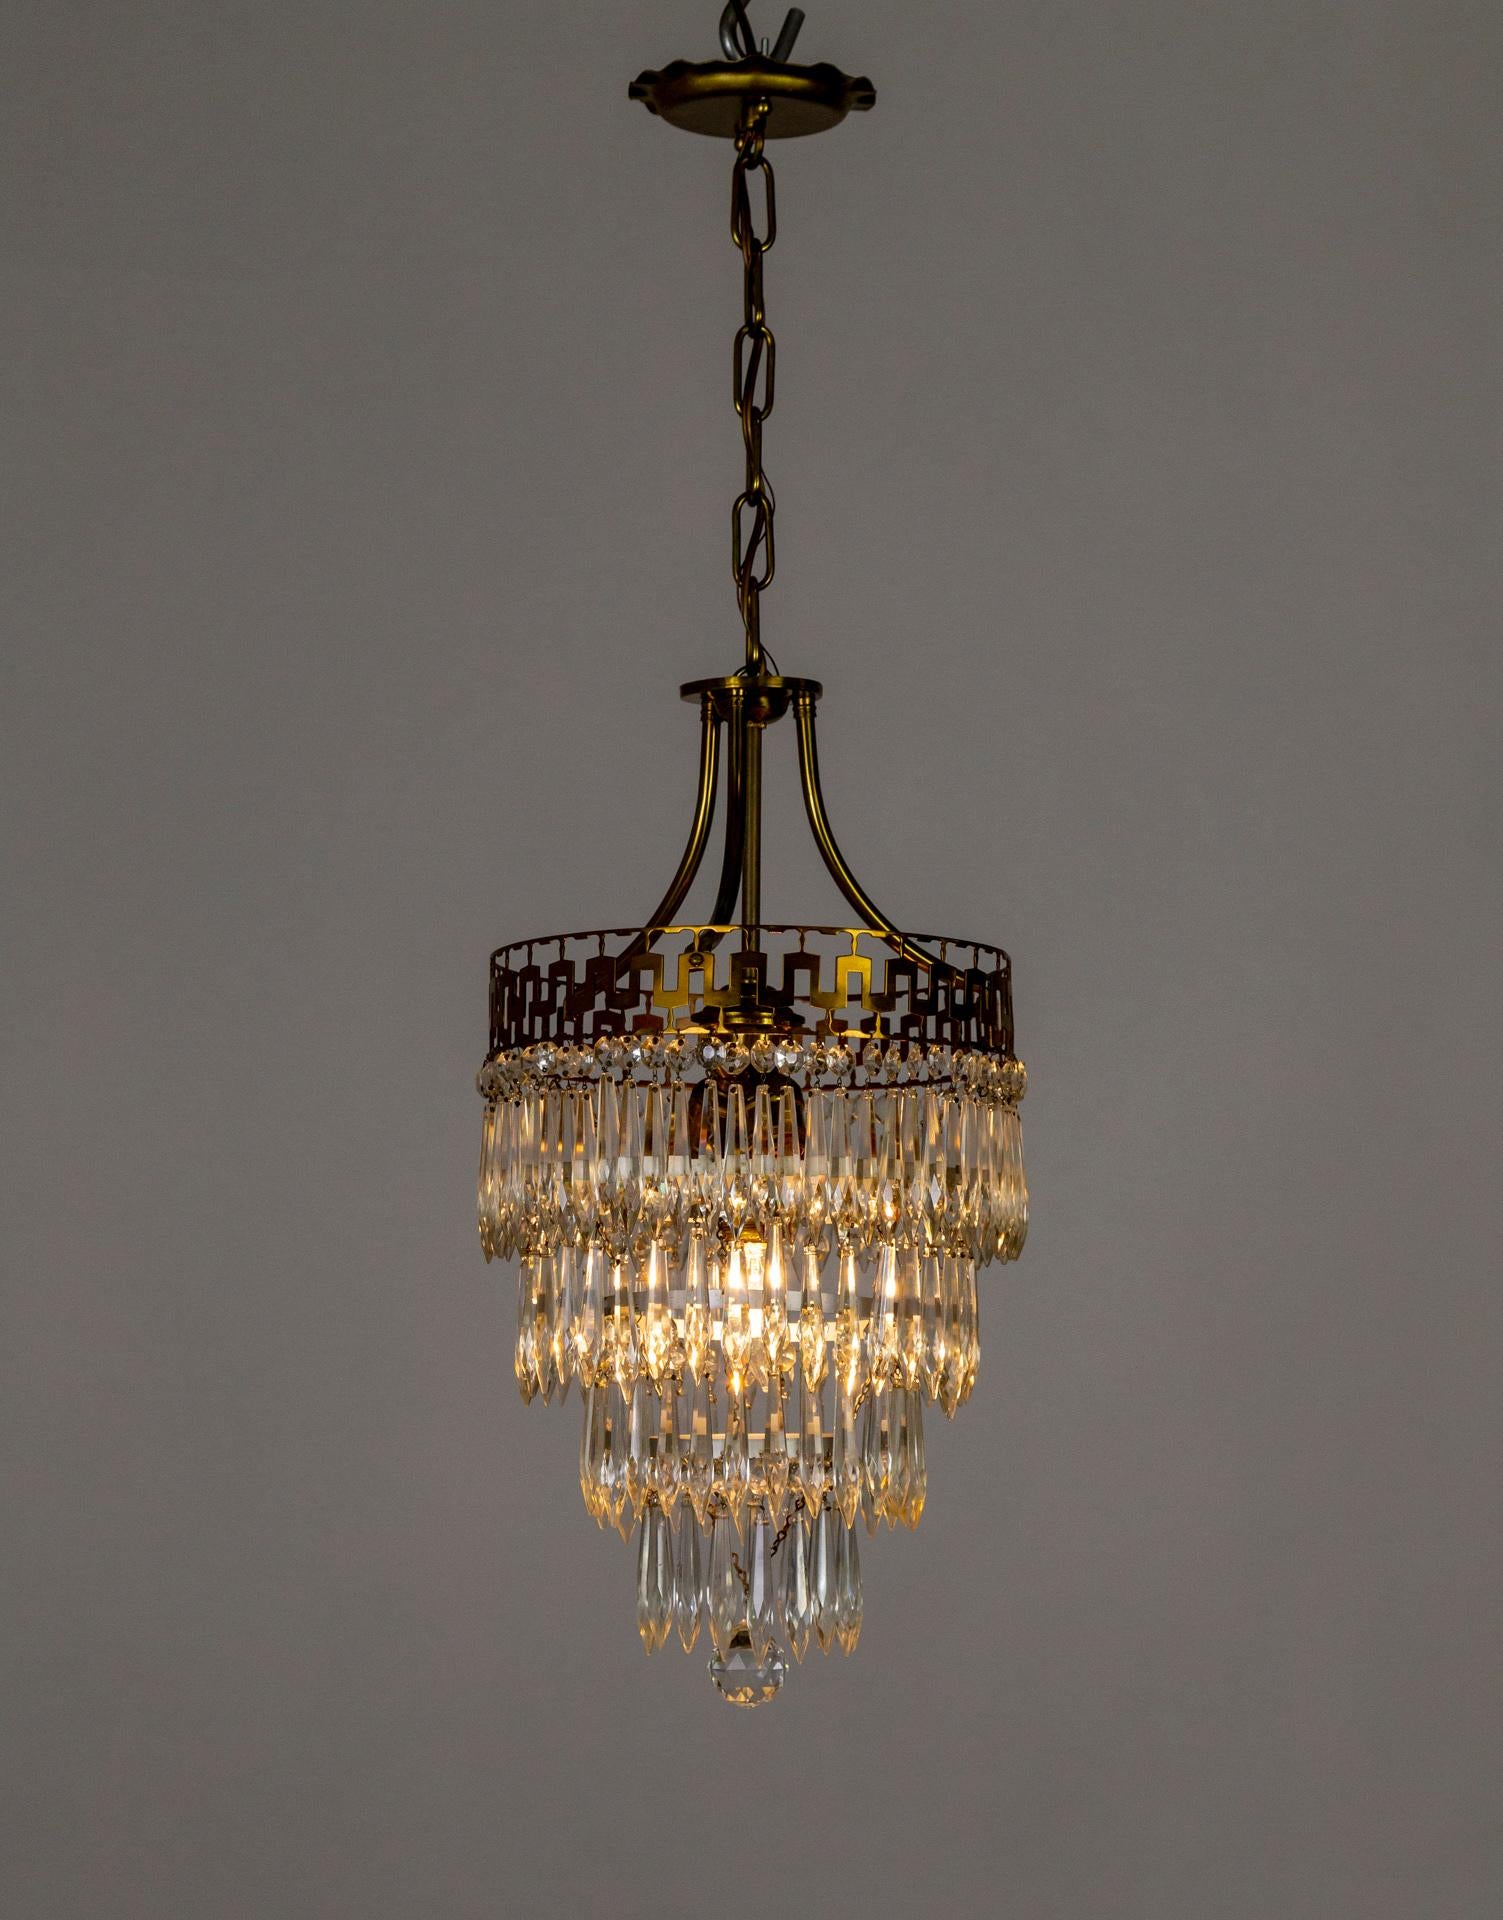 Here is a handmade, Neoclassical, 4-tiered, wedding cake-style hanging light fixture from the mid-20th century. It has the original canopy, with a chain leading to the brass stems holding the cluster of 3 medium base sockets and the brass rim cut